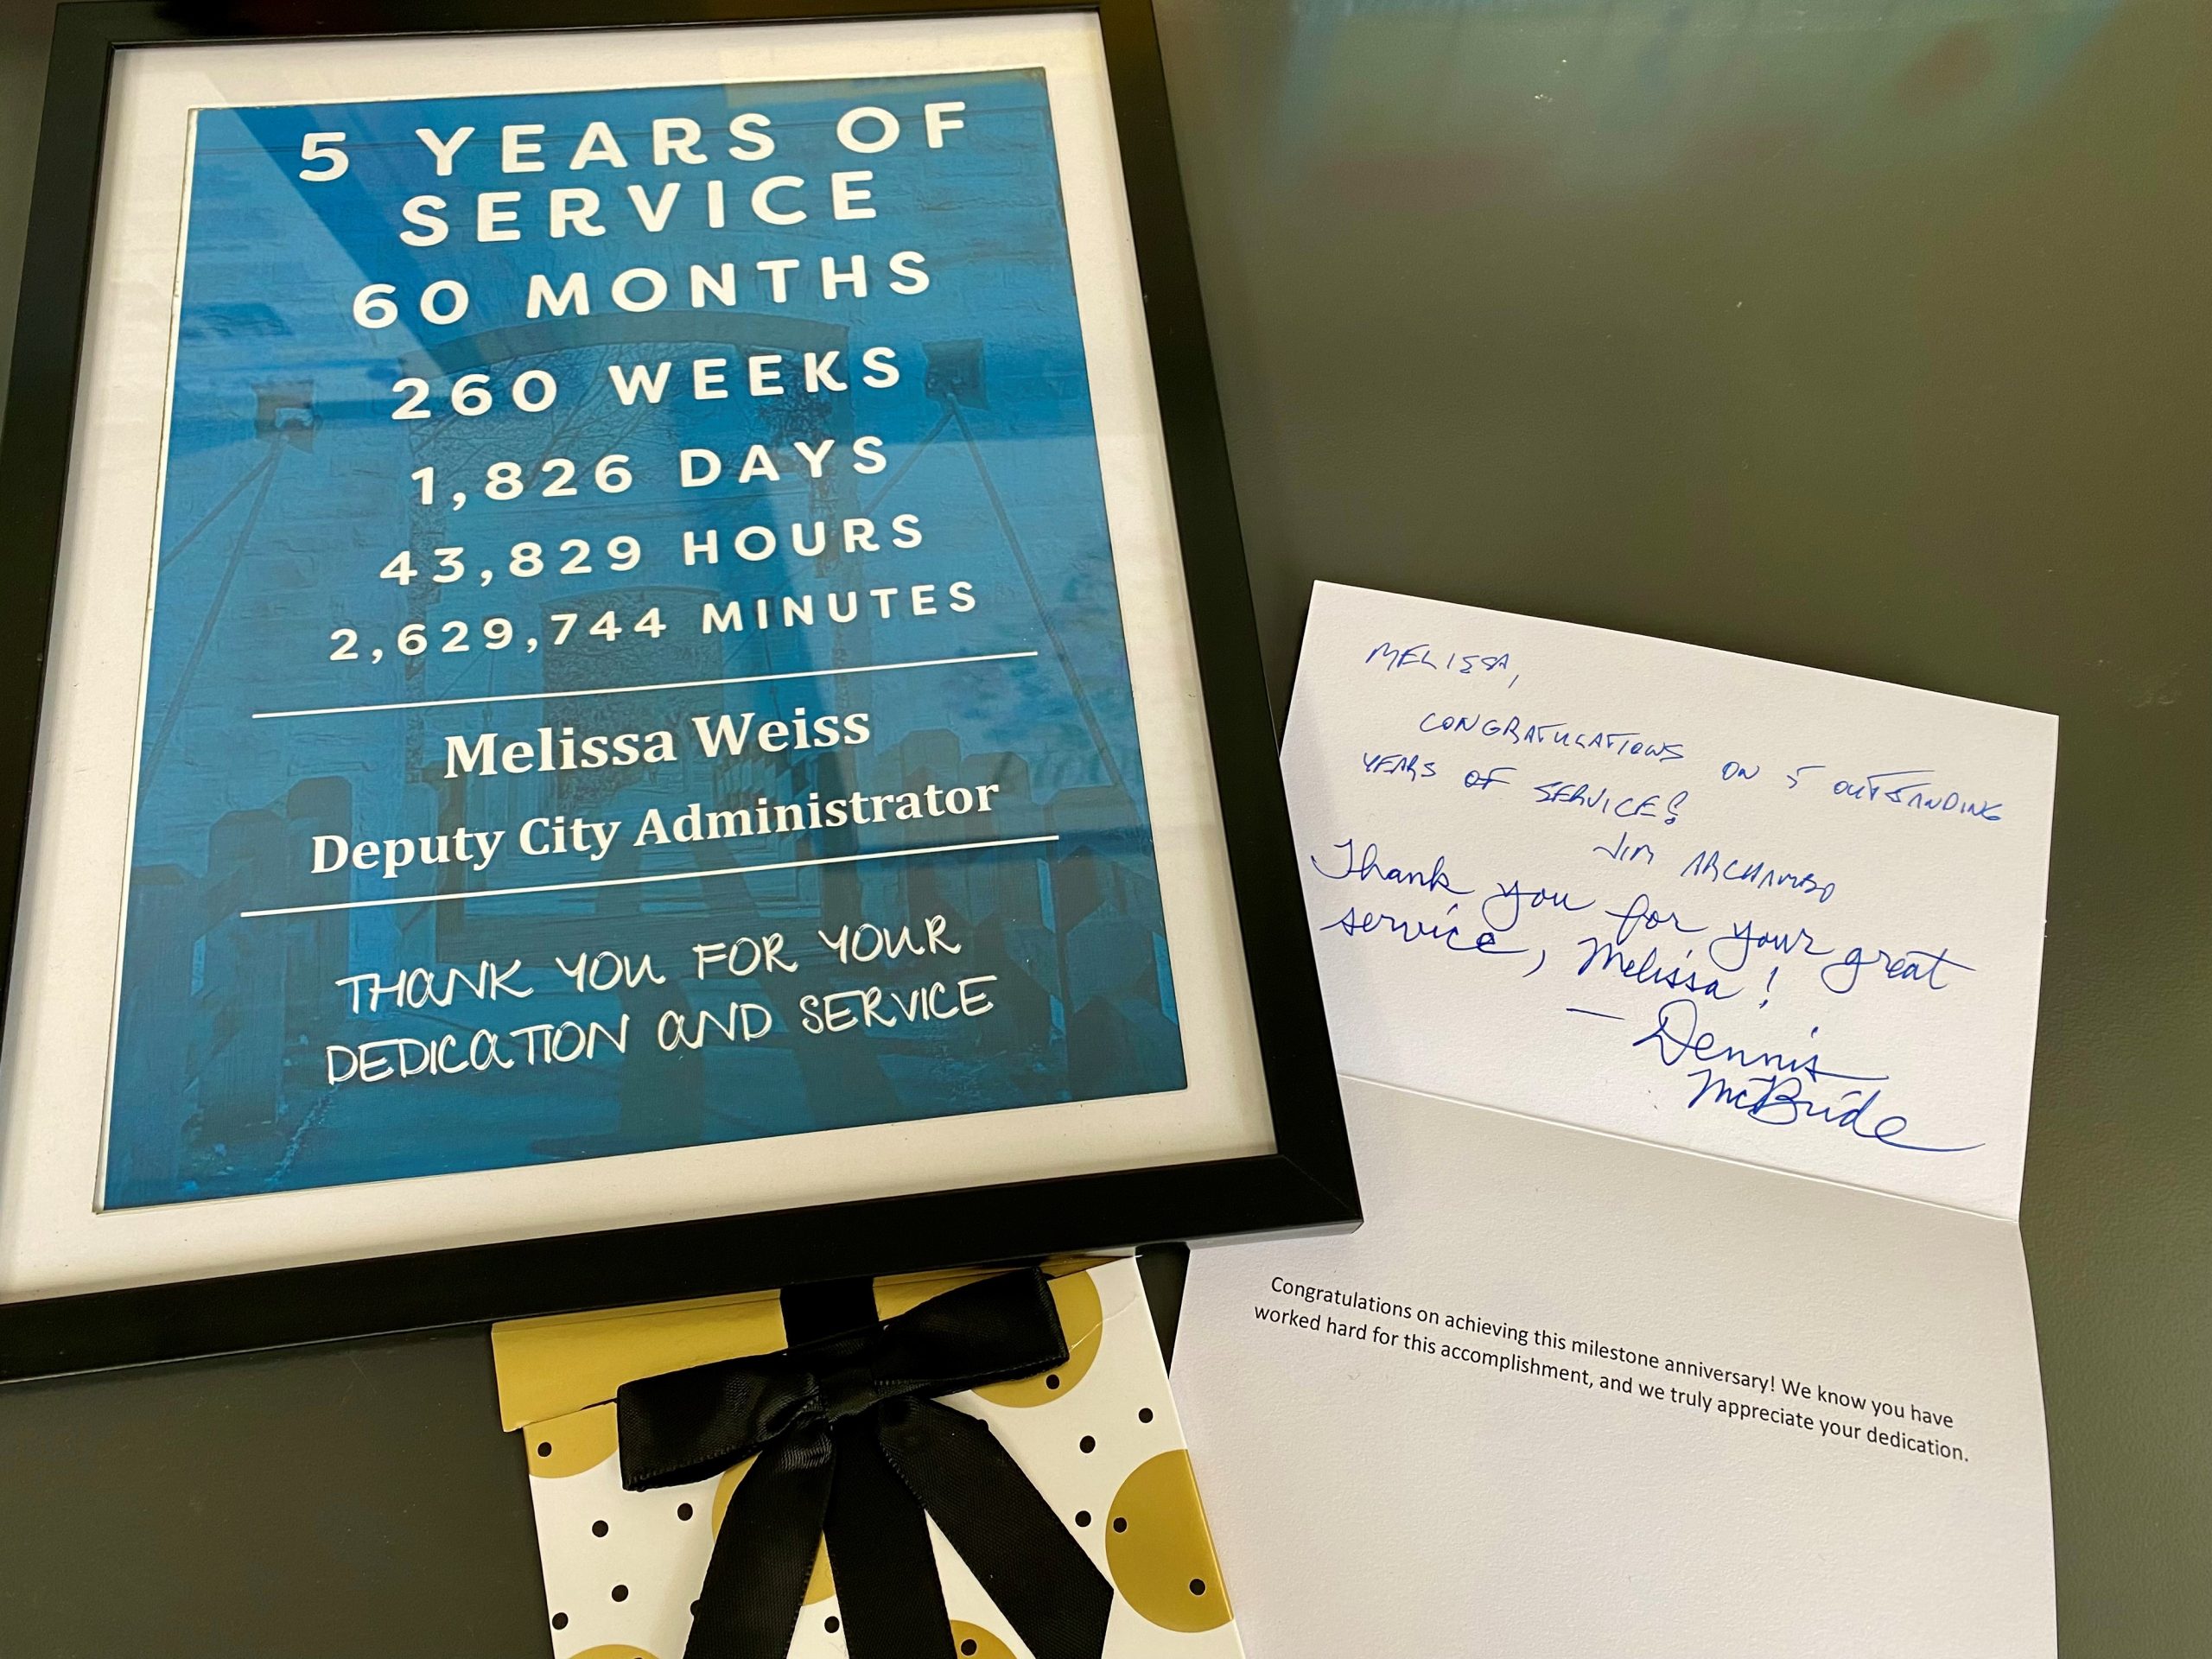 picture of employee recognition certificate, handwritten thank you note, and a gift card